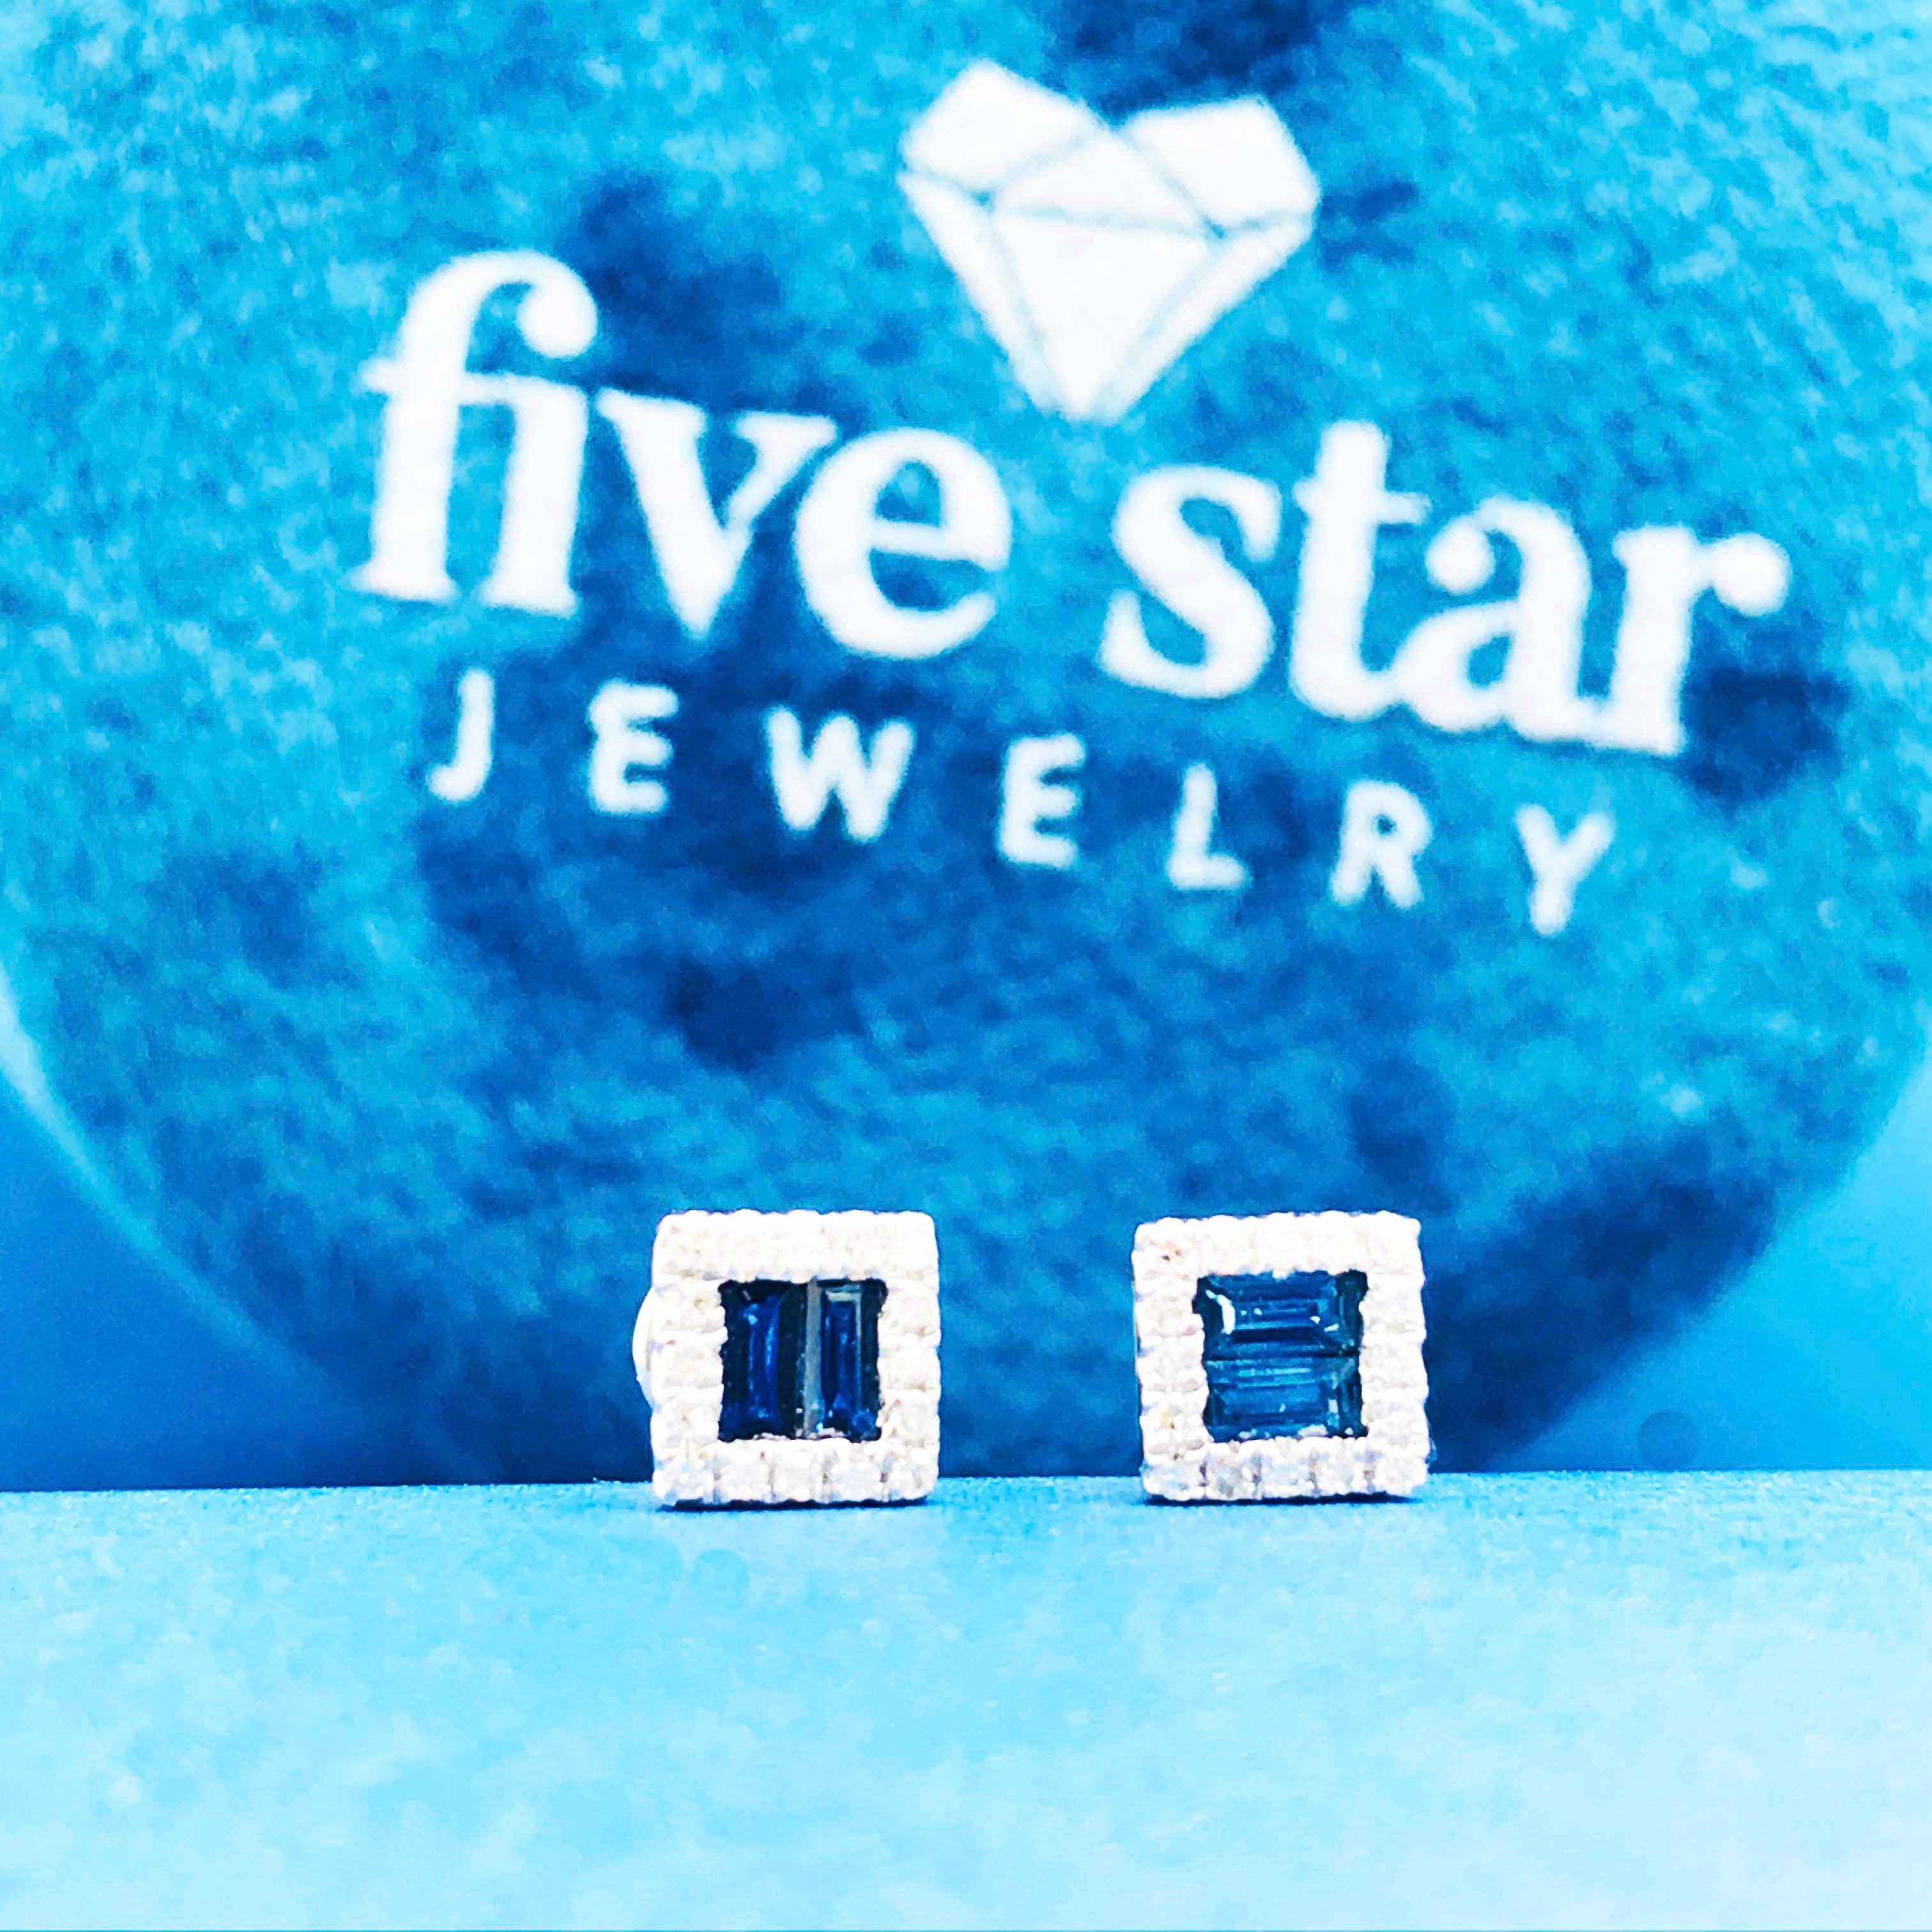 Gorgeous blue sapphire earrings with a diamond frame! These trendy earring studs are stunning. With two genuine blue sapphire gemstones cut in a baguette shape to create a perfect square shape in each earring stud. Each earring stud has a bold, deep